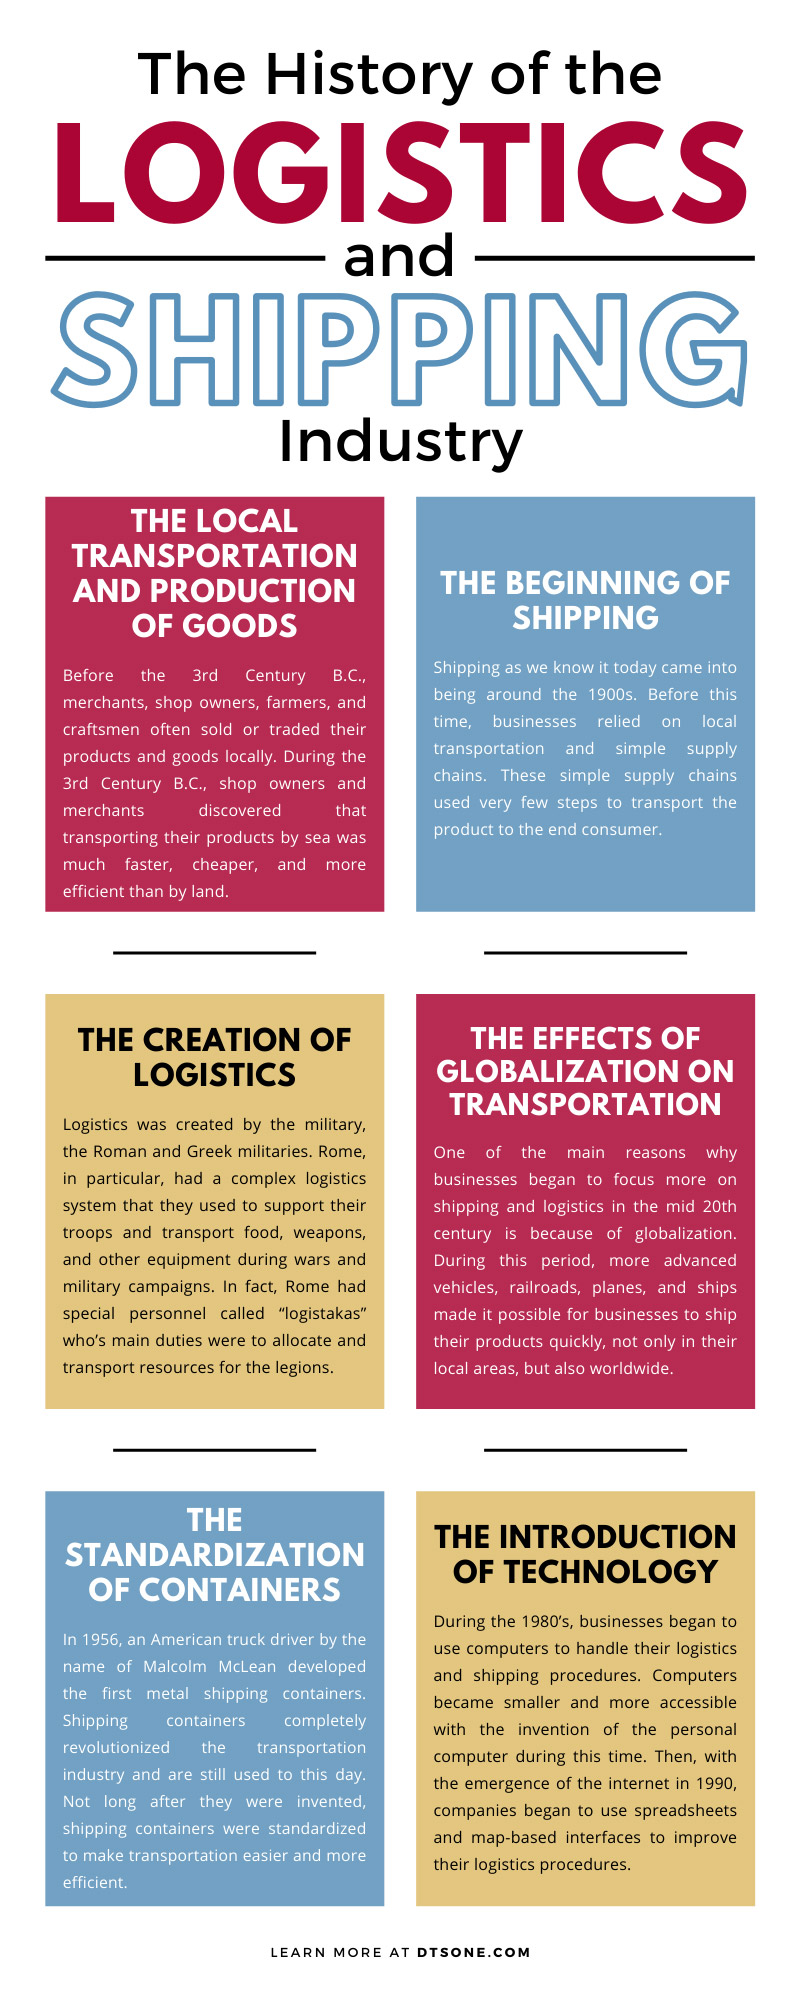 The History of the Logistics and Shipping Industry